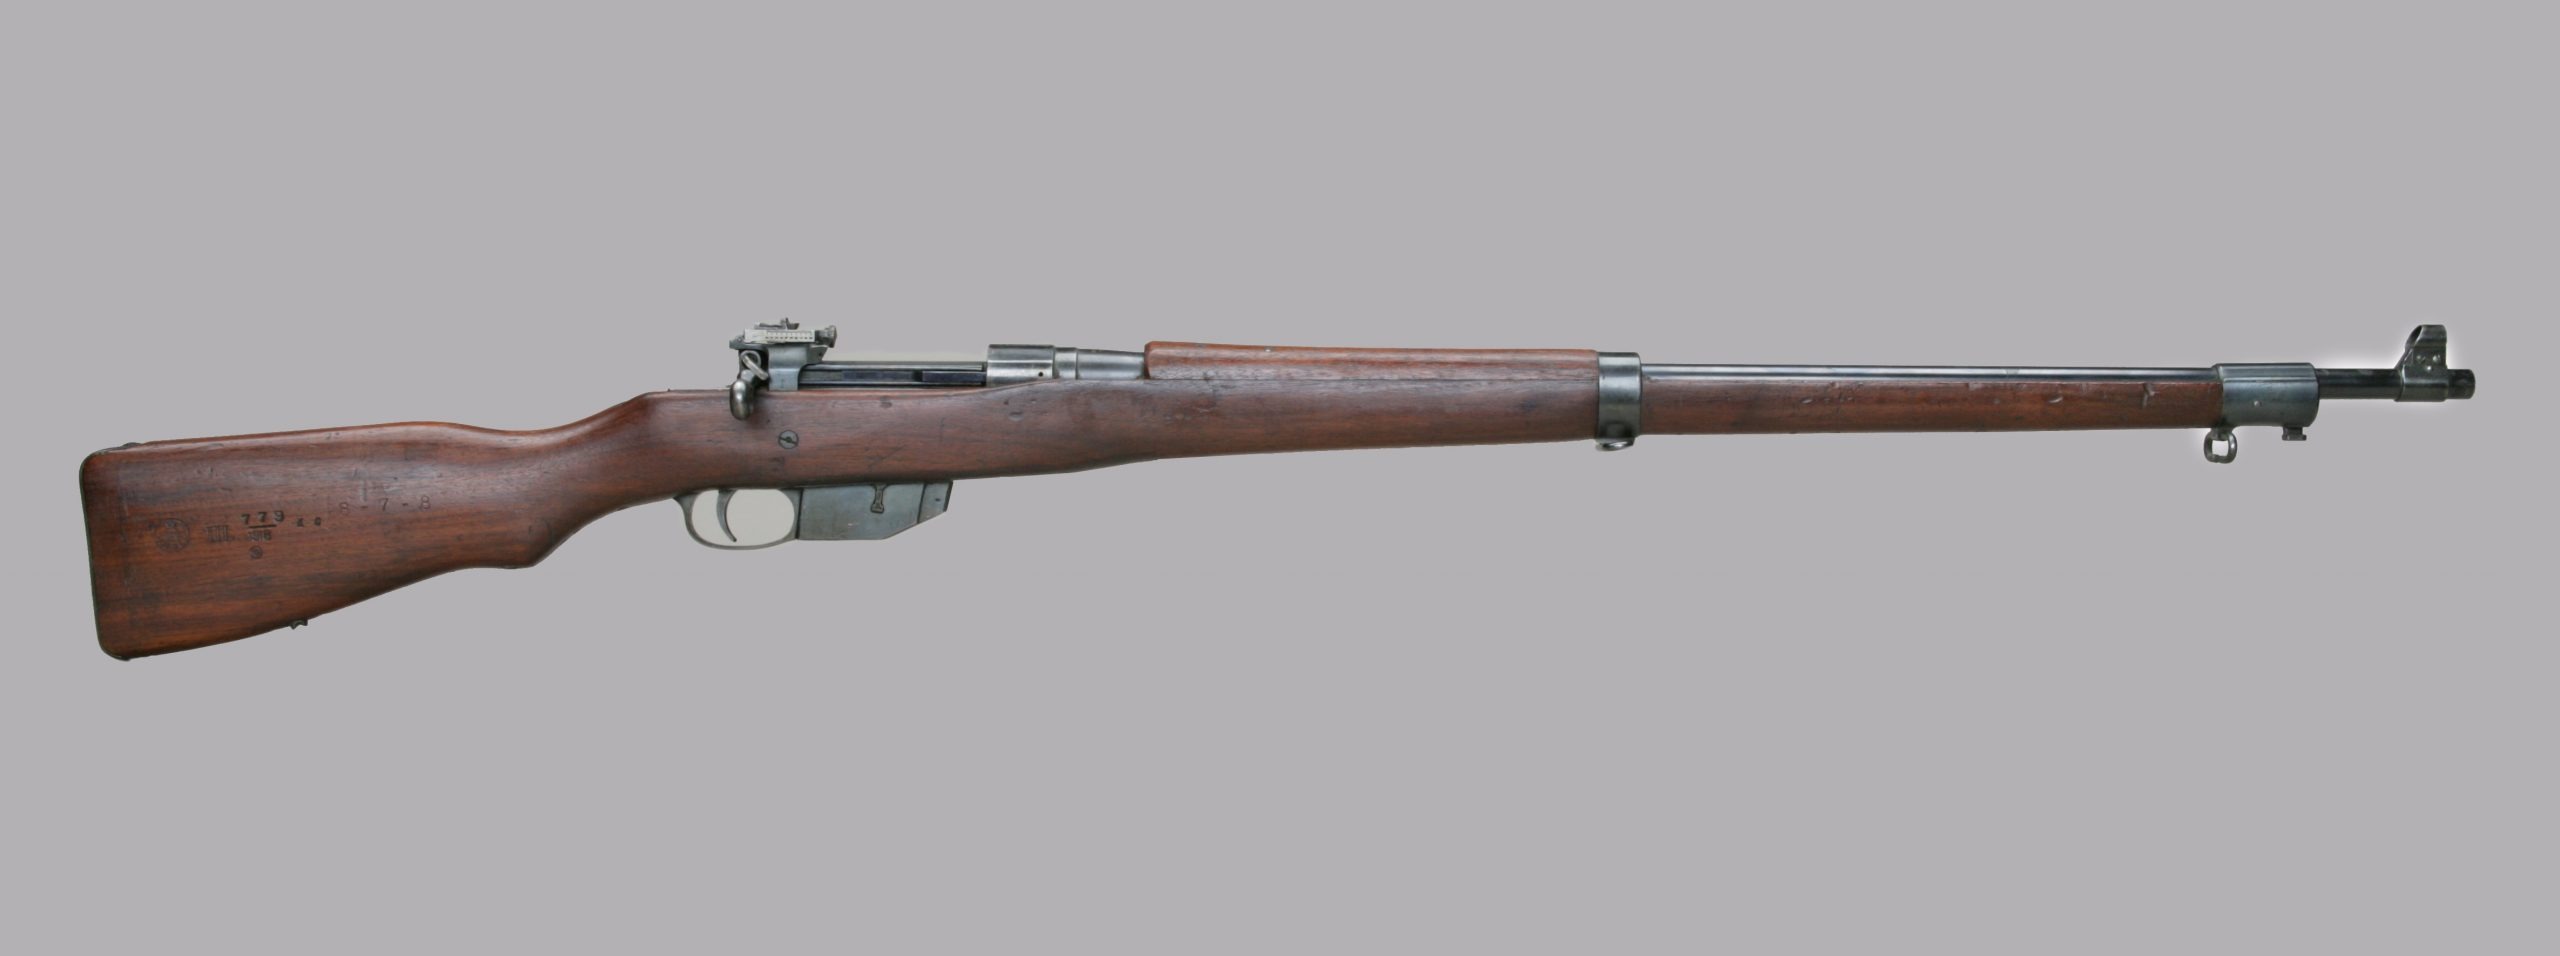 Canada developed the Ross Rifle because the British wouldn't give them Lee-Enfields during the 1899–1902 South African War. After the war the British urged Canada to switch to the Lee-Enfield but Canada refused. Ross Rifle proved ineffective in WW1 and Canada switched to the Lee-Enfield in 1916.